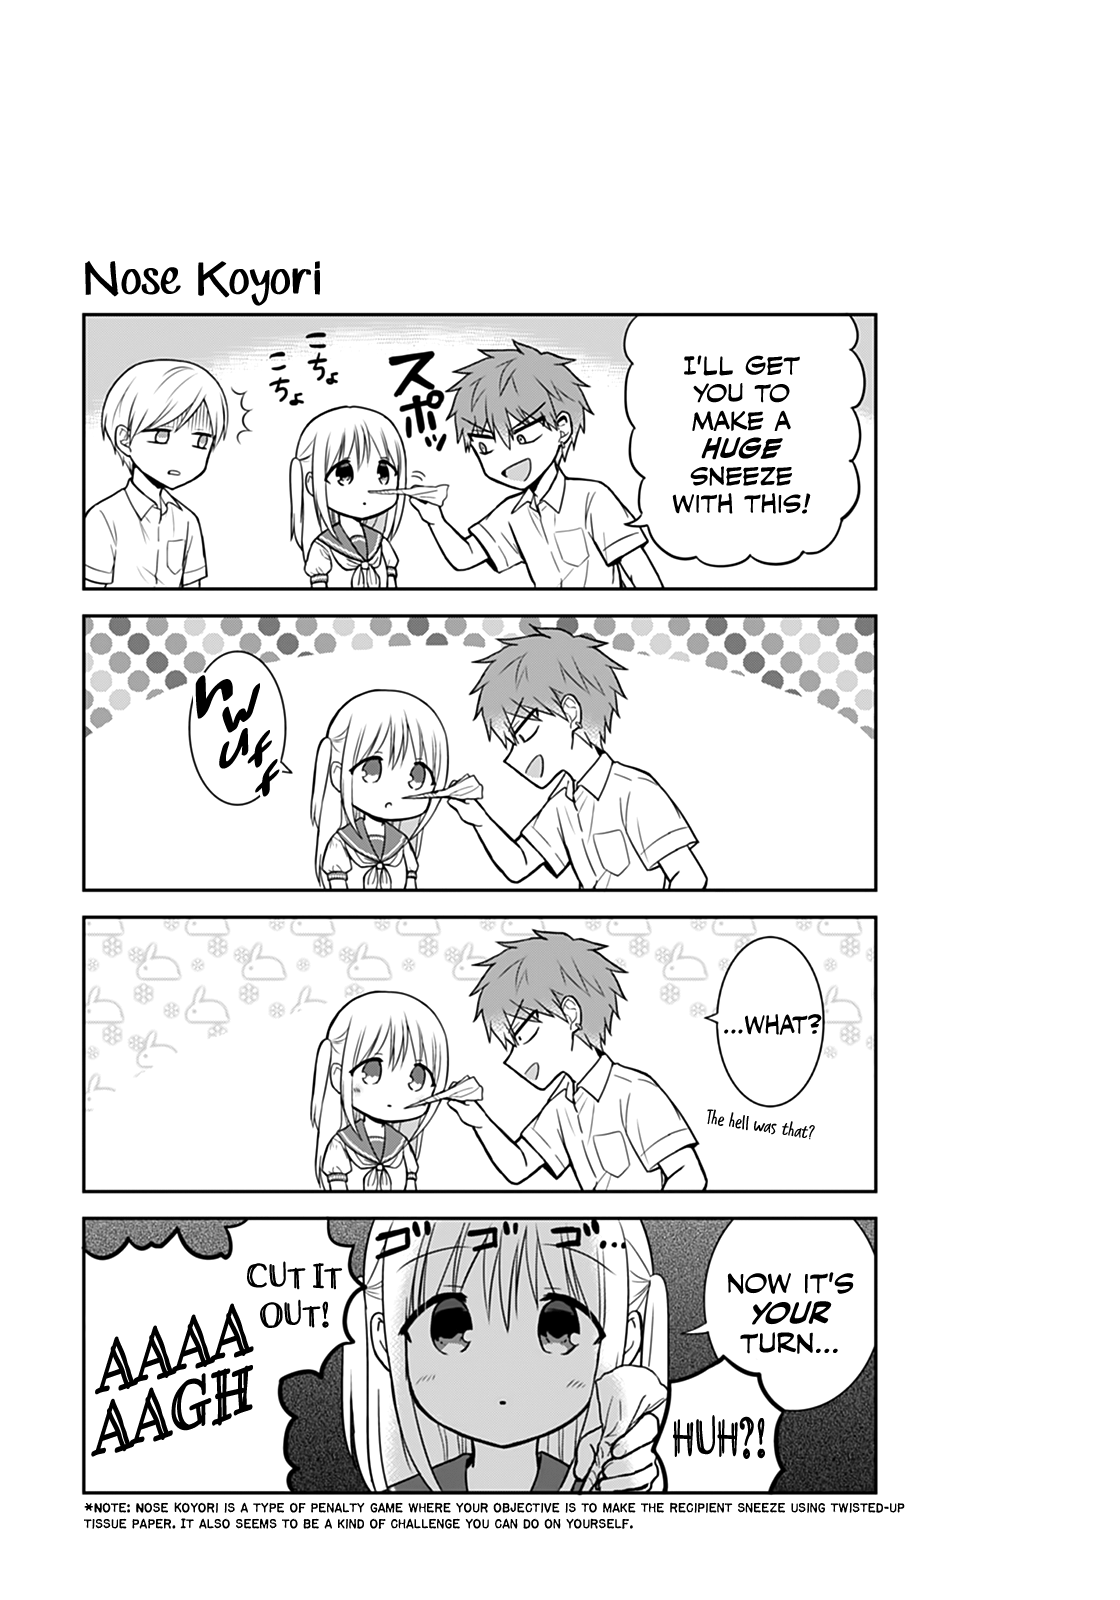 Expressionless Face Girl And Emotional Face Boy Vol.3 Chapter 32